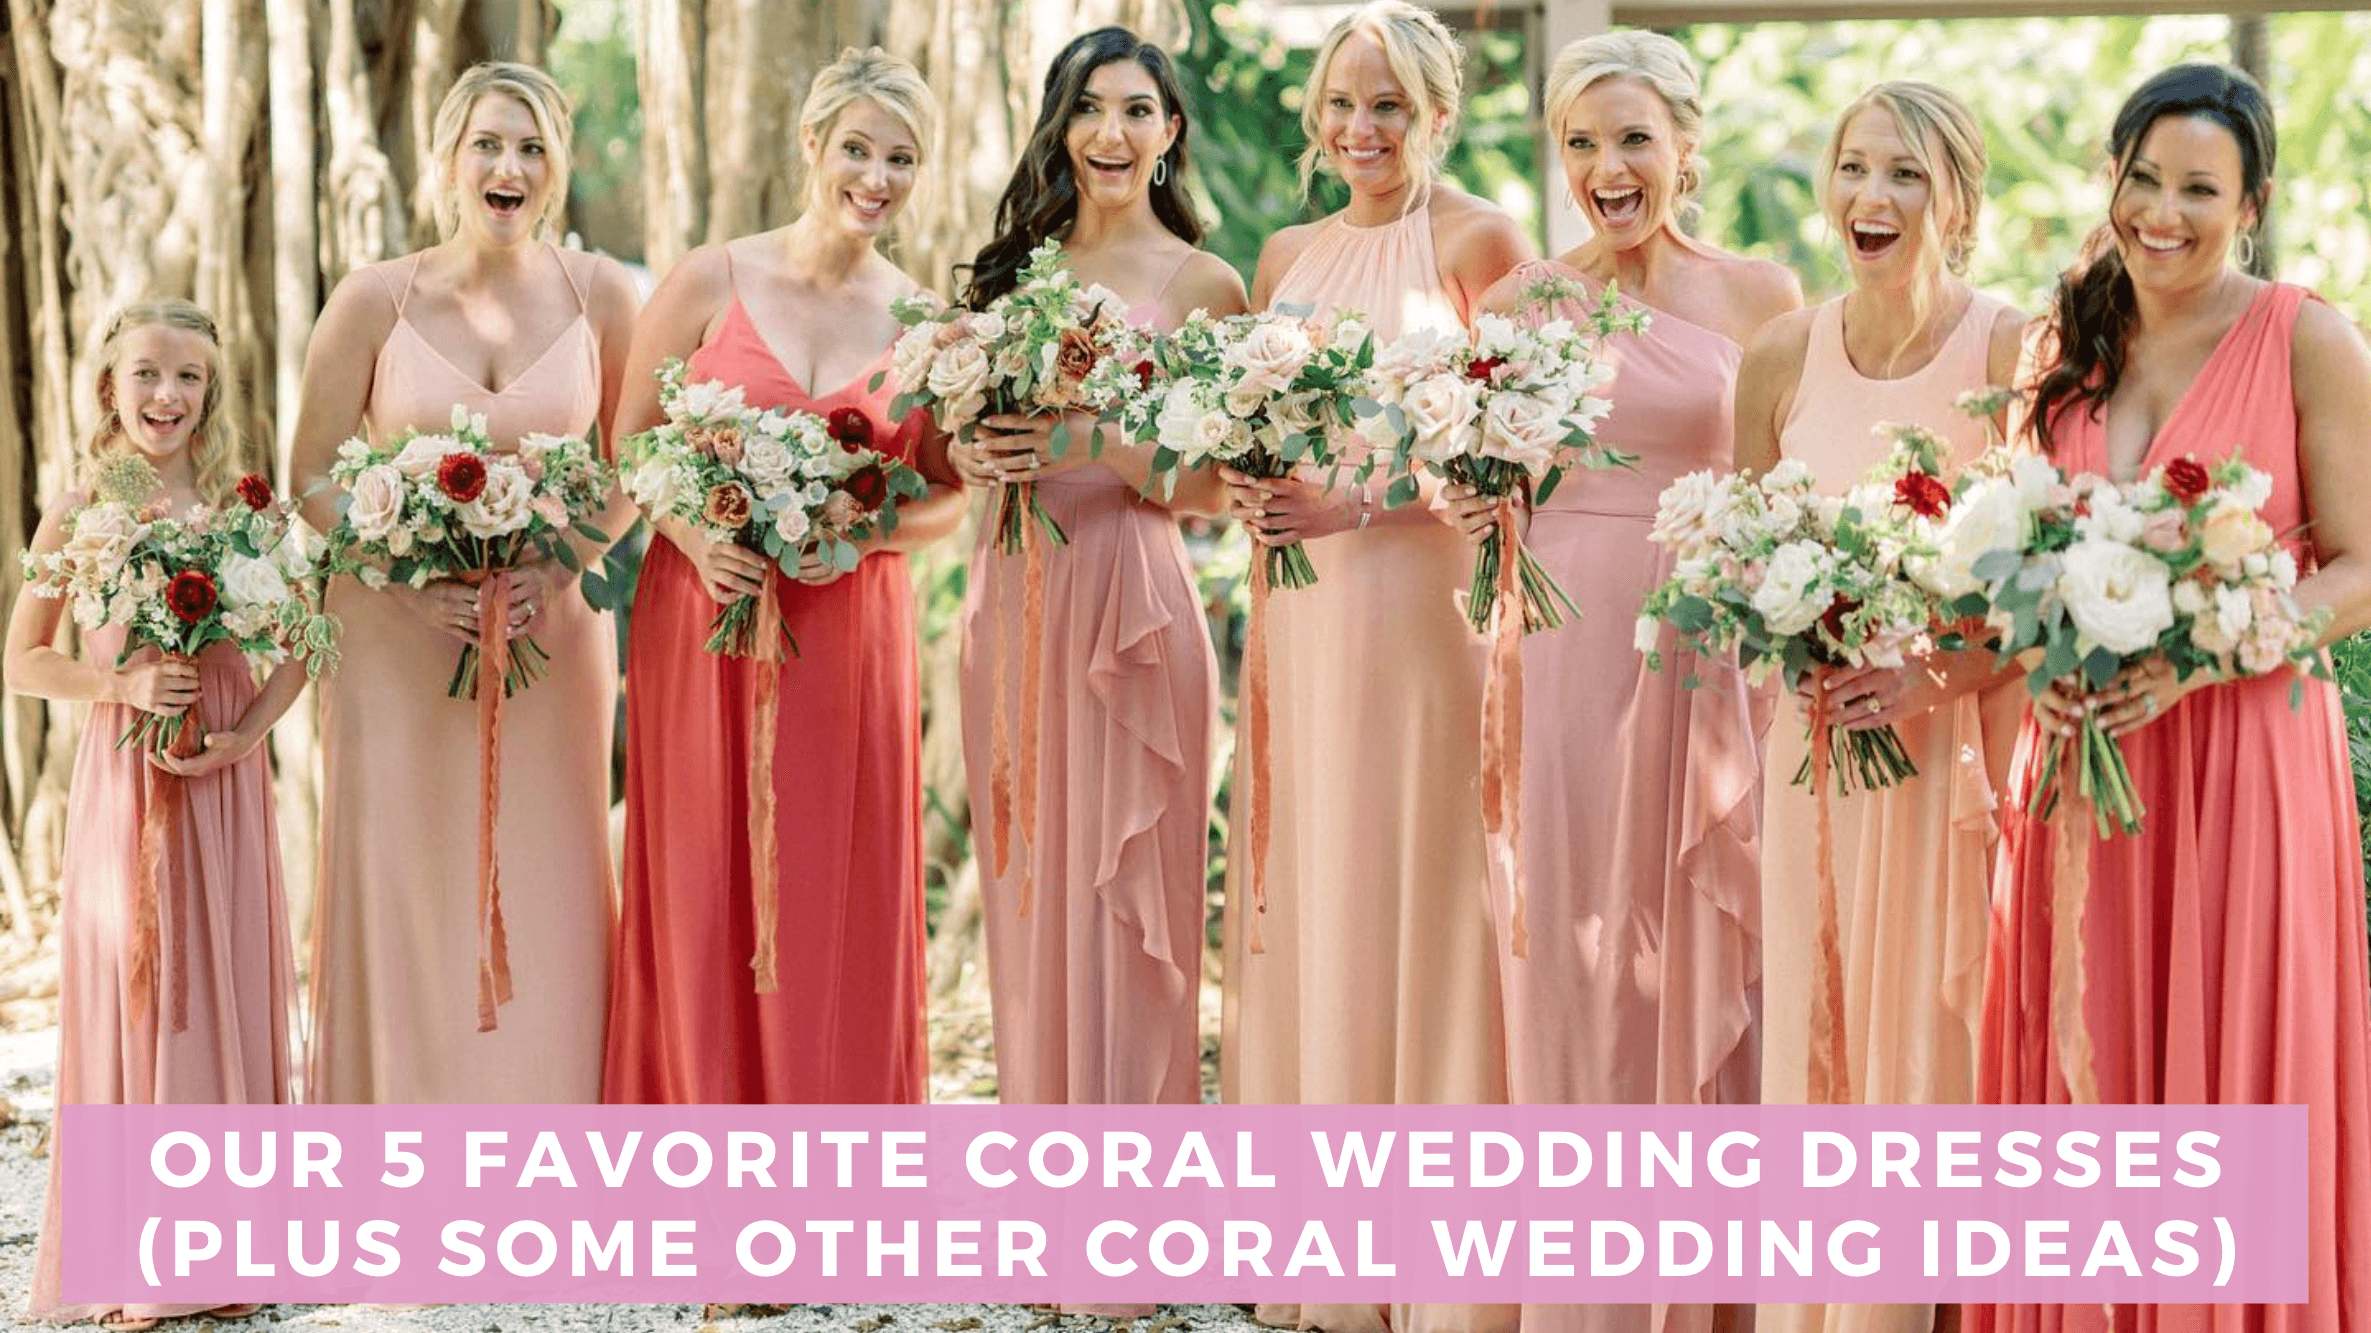 BridesMade - Looking stunning in our coral infinity dress